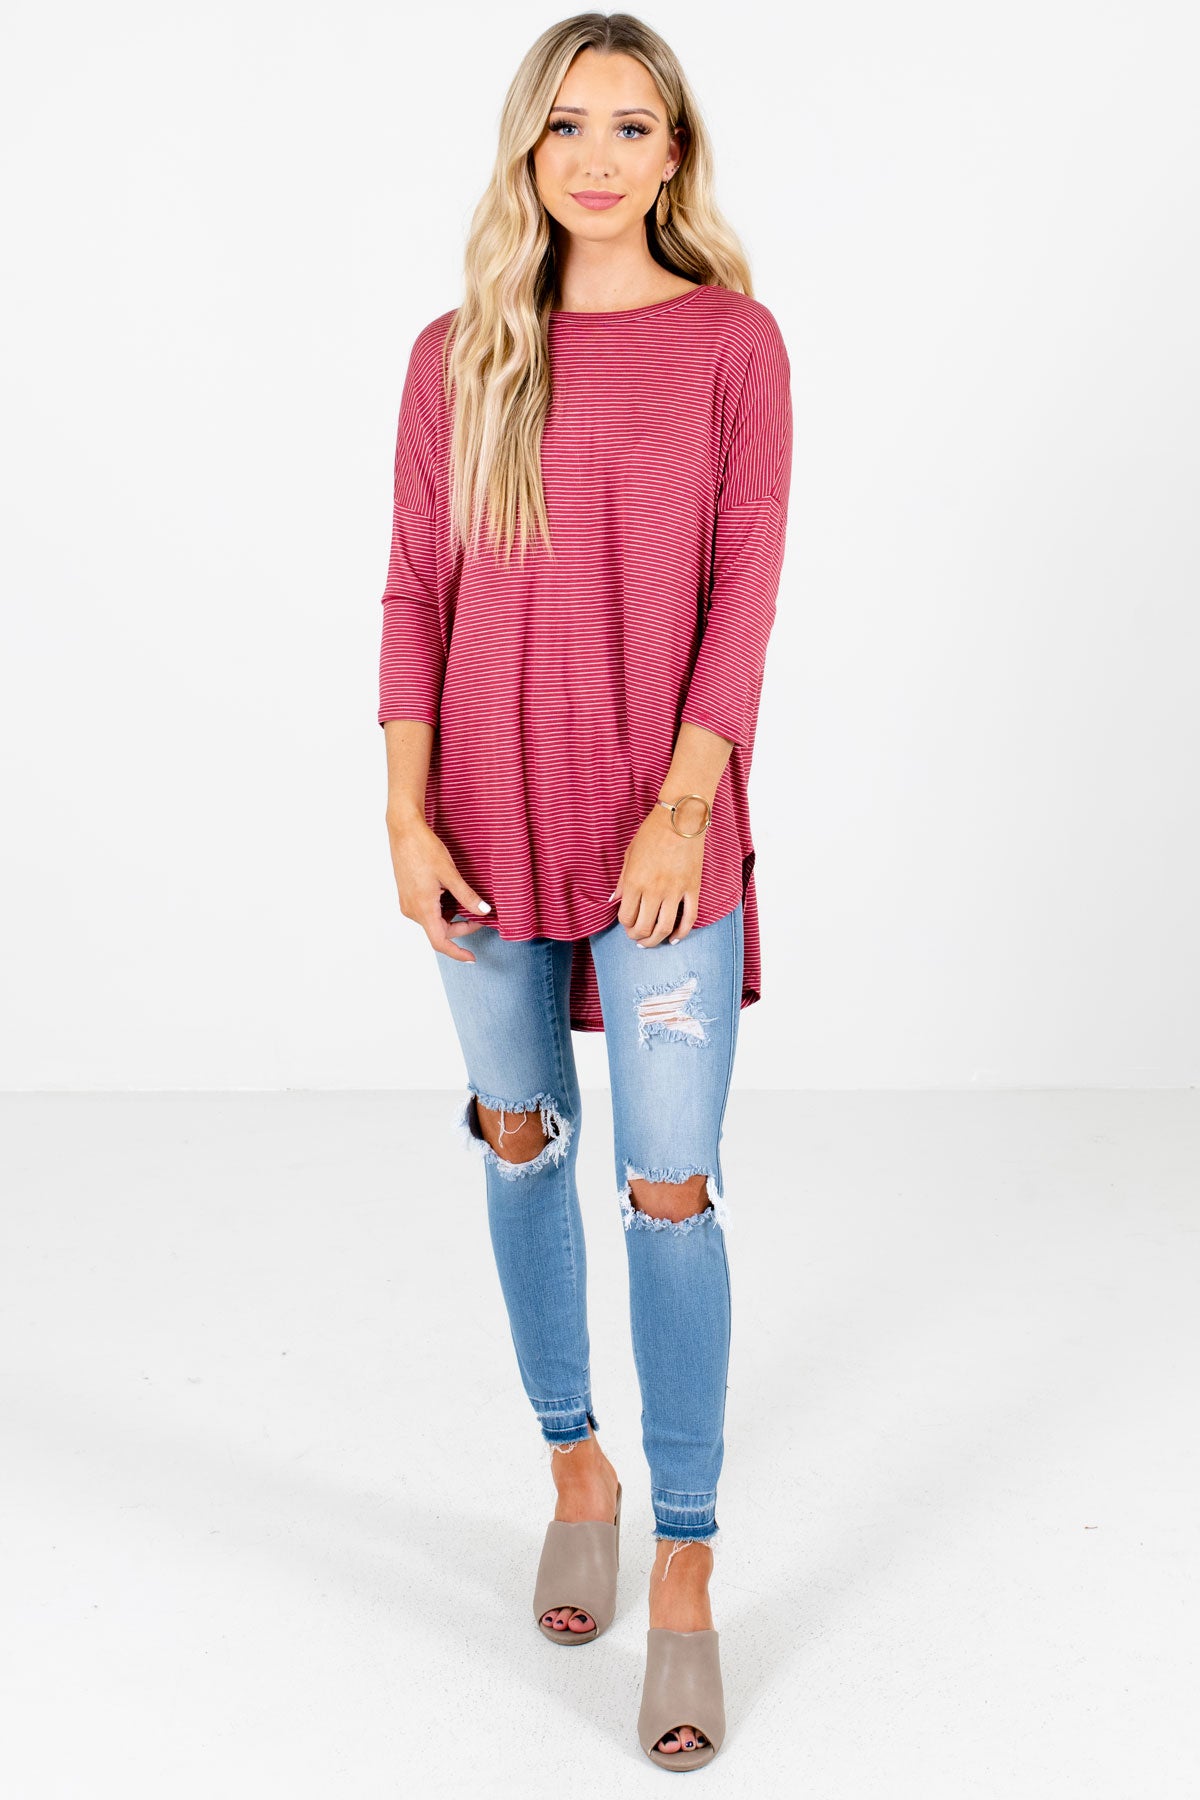 Love You Dearly Red Striped Top | Boutique Tops for Women - Bella Ella ...